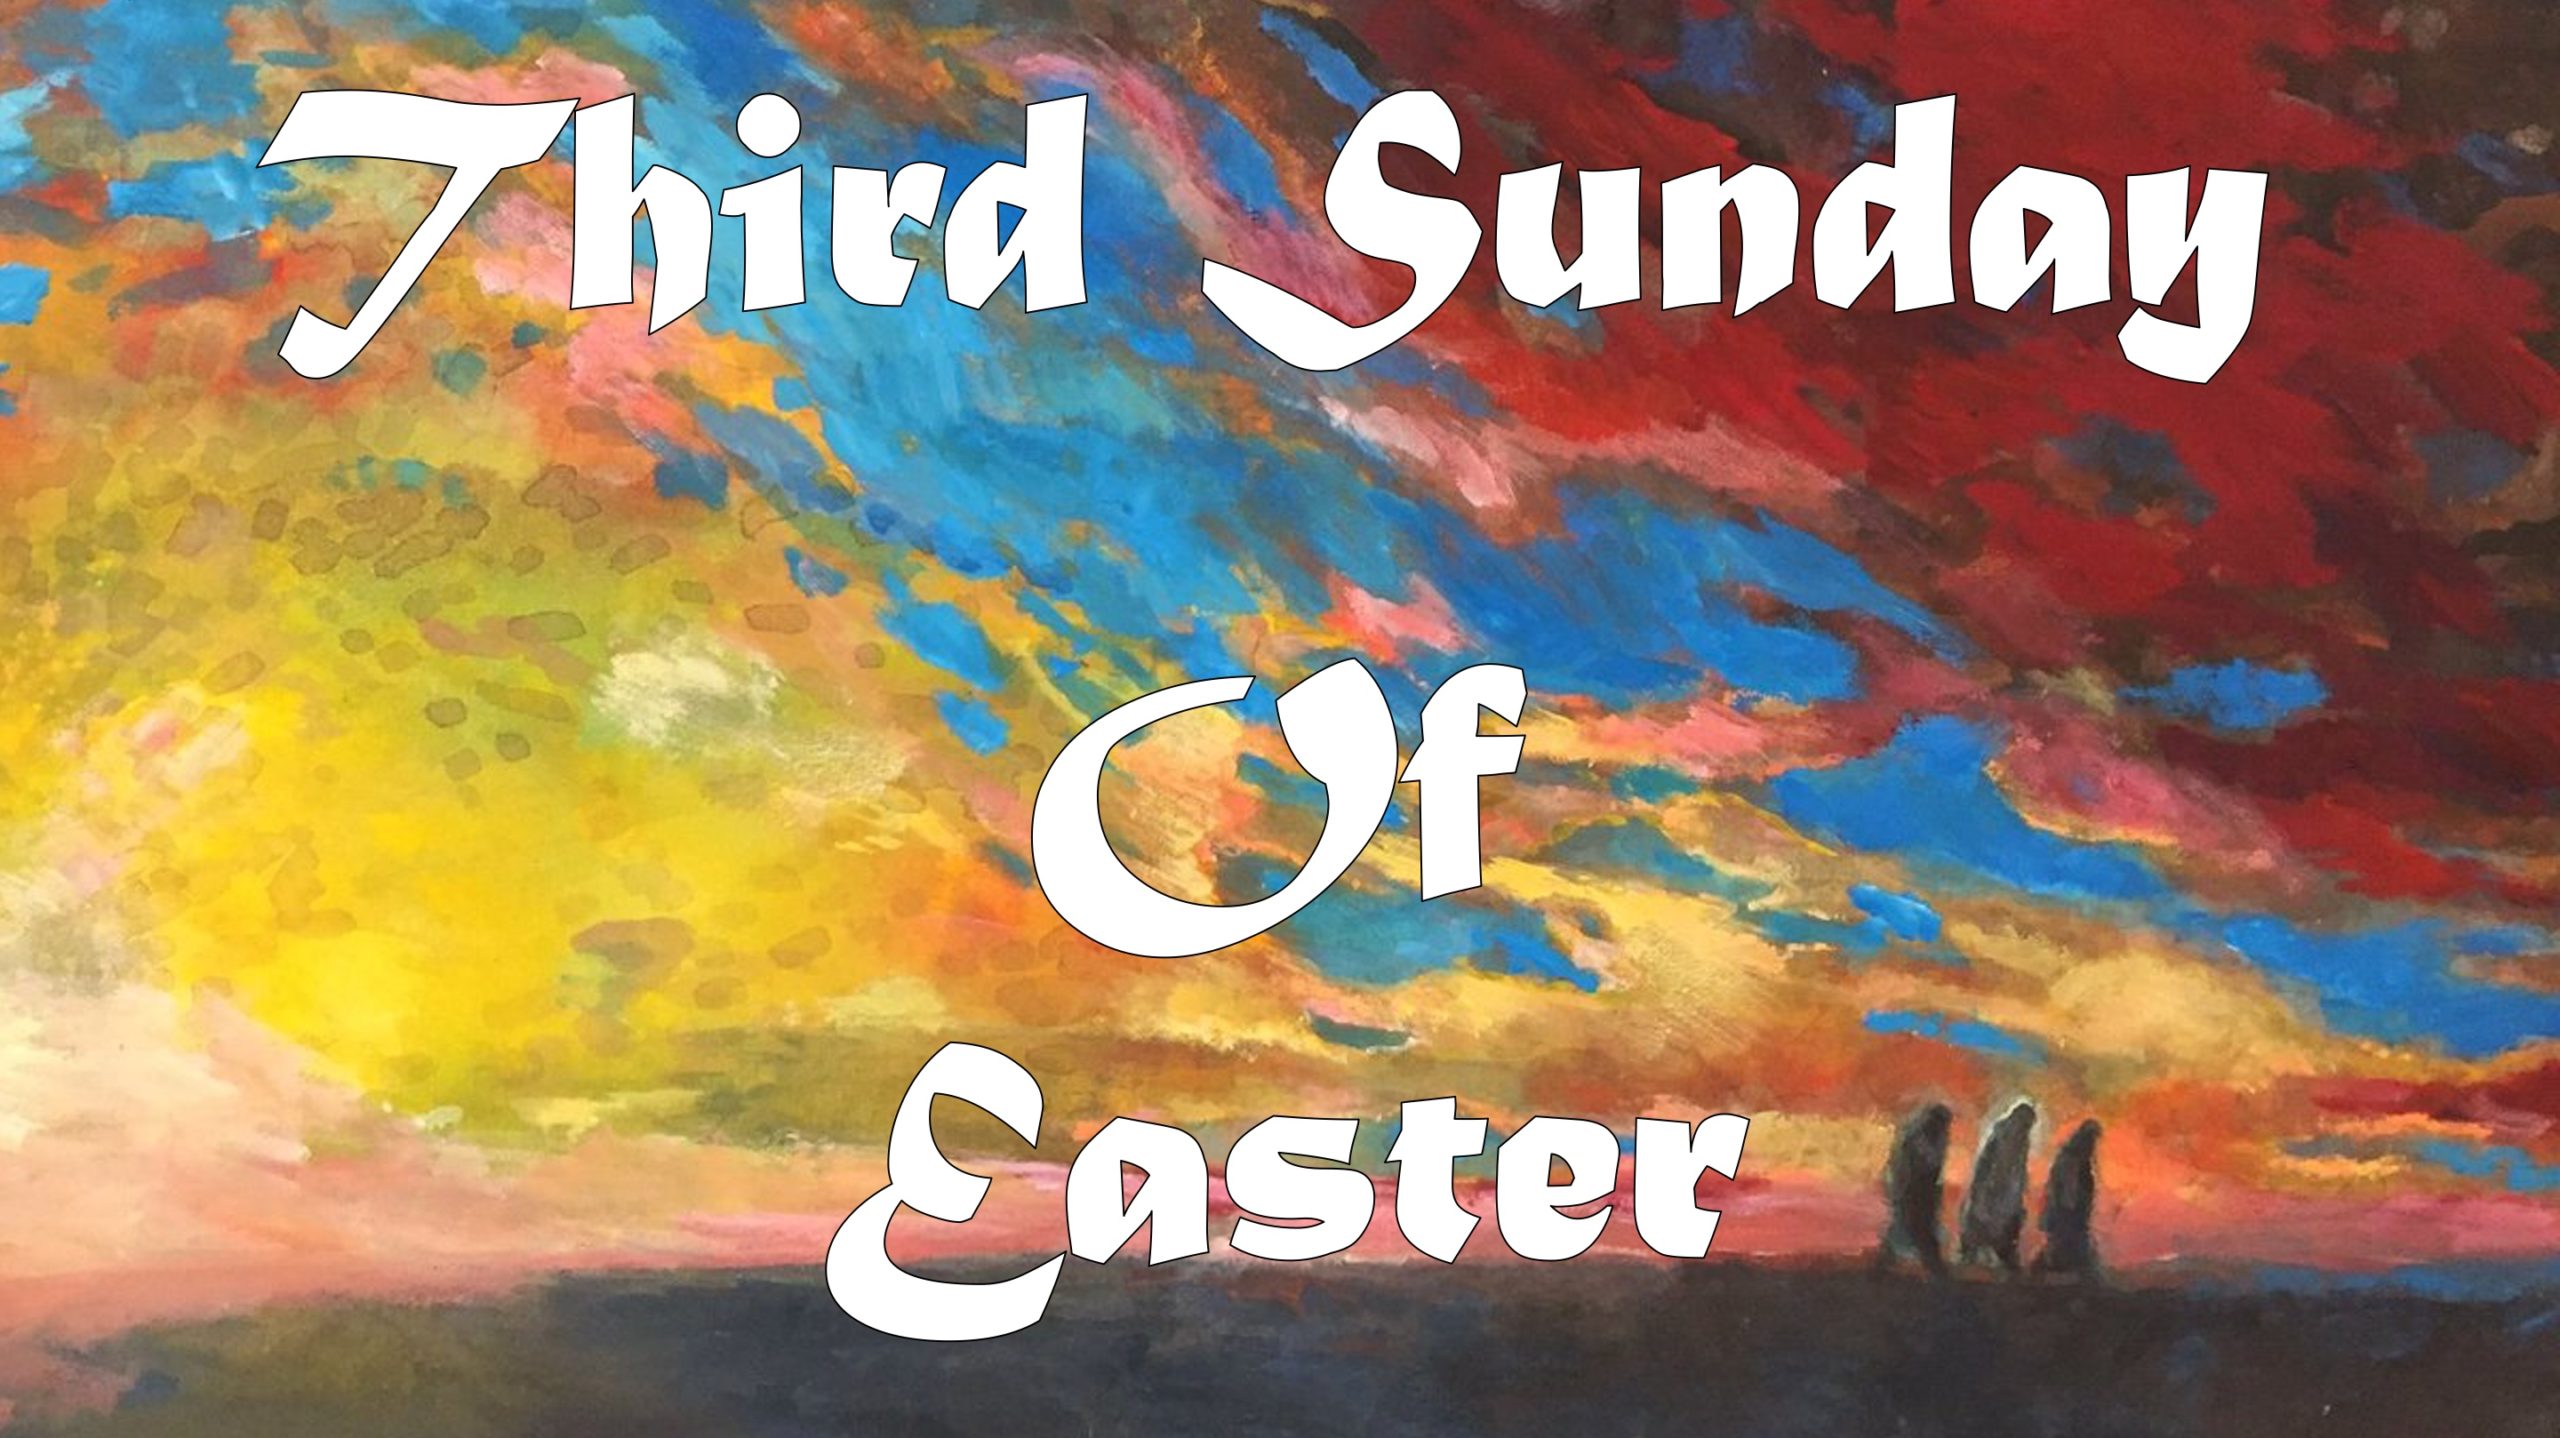 Sunday, April 26th 3rd Sunday of Easter Liturgy of Holy Eucharist